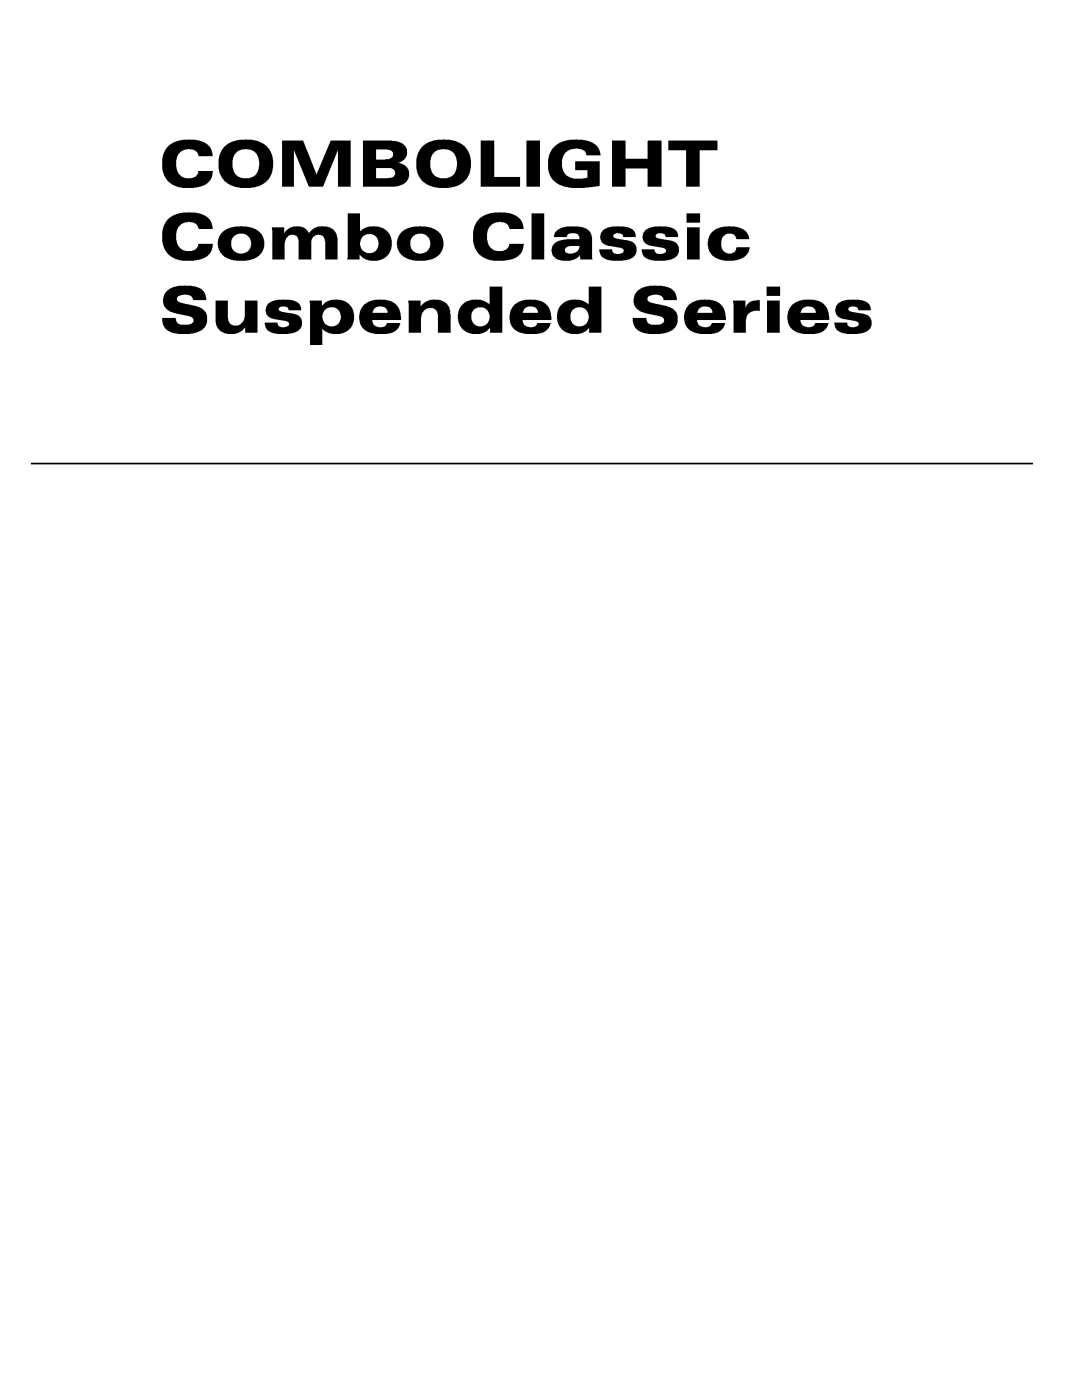 Cooper Lighting manual COMBOLIGHT Combo Classic Suspended Series 